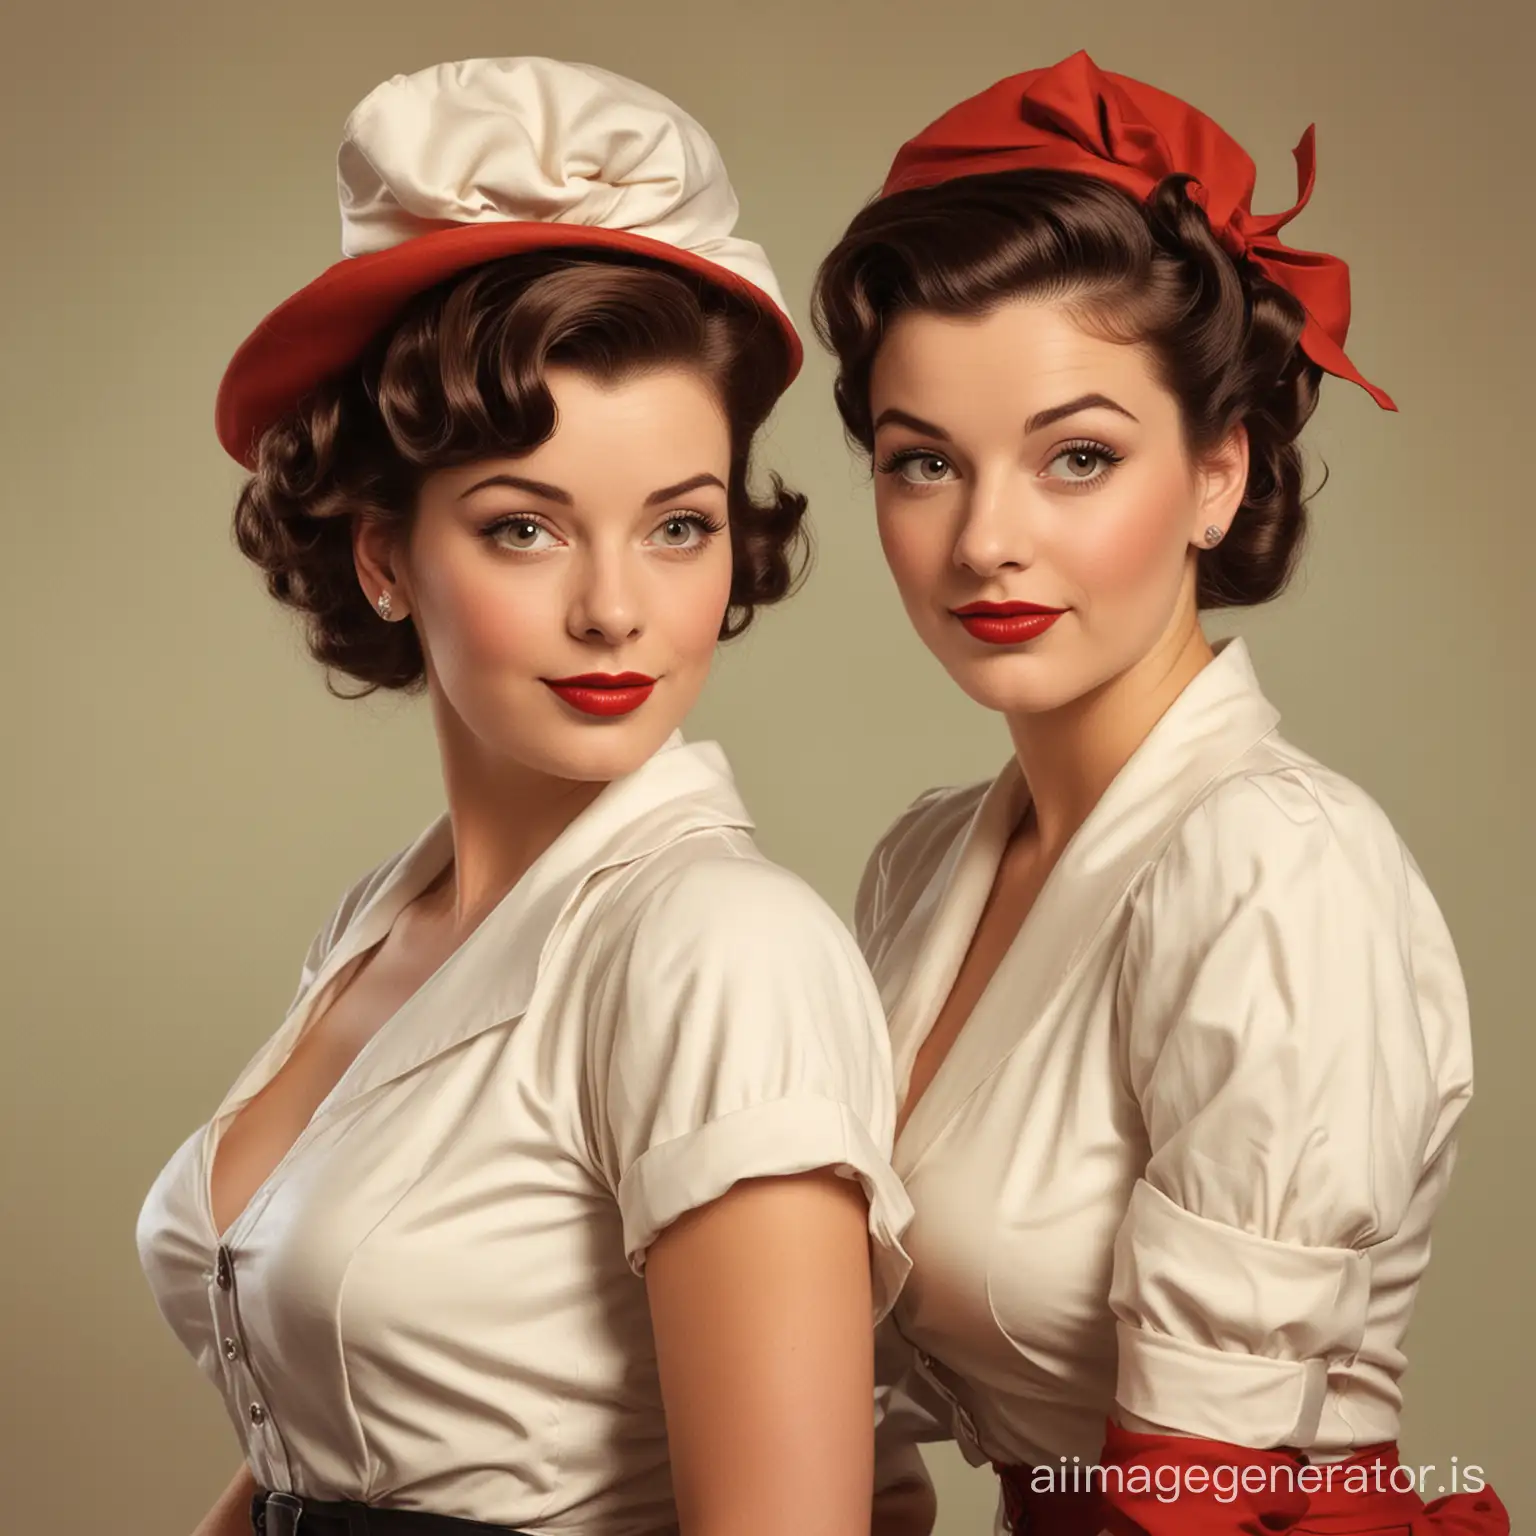 Vintage-Style-Portrait-Two-Women-Posed-in-the-Fashion-of-Gil-Elvgren